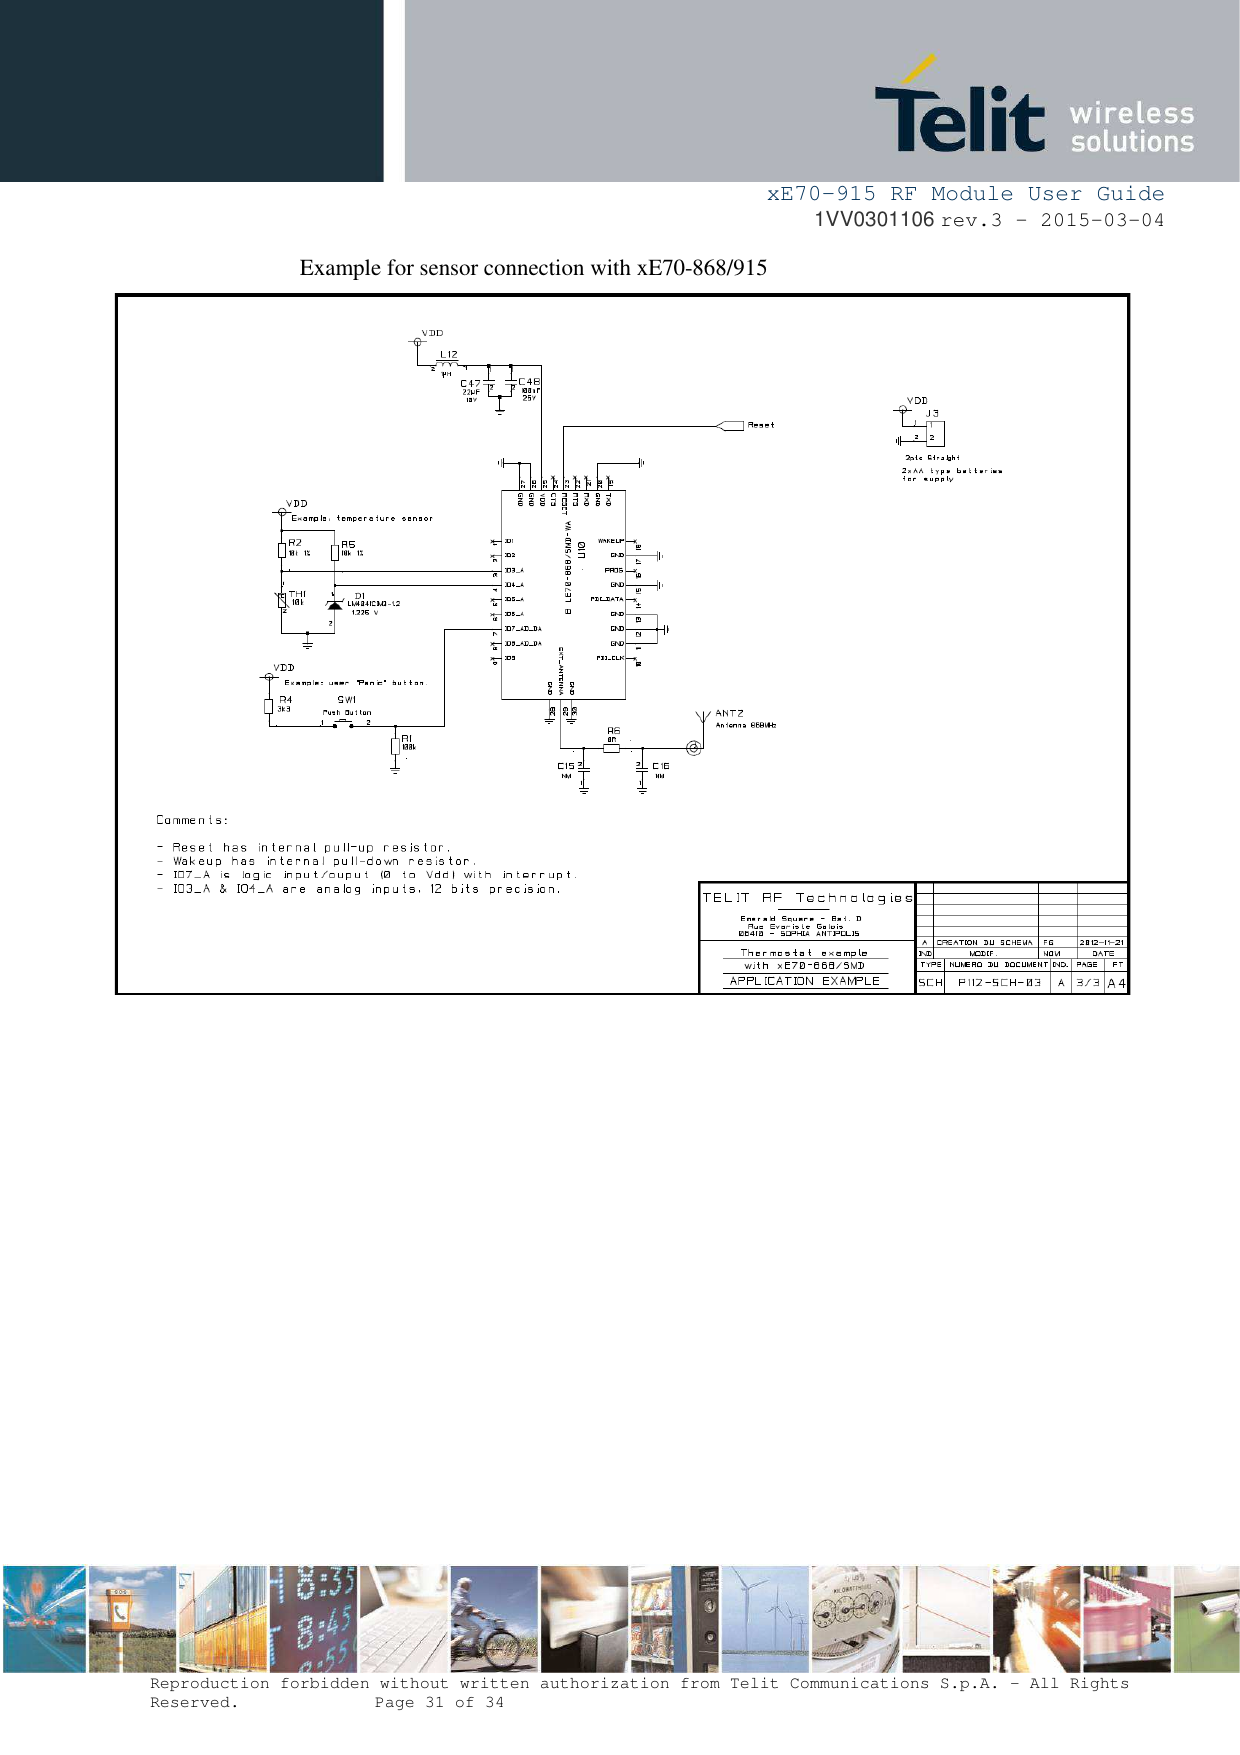 xE70-915 RF Module User Guide 1VV0301106 rev.3 – 2015-03-04 Reproduction forbidden without written authorization from Telit Communications S.p.A. - All Rights Reserved.    Page 31 of 34 Example for sensor connection with xE70-868/915 